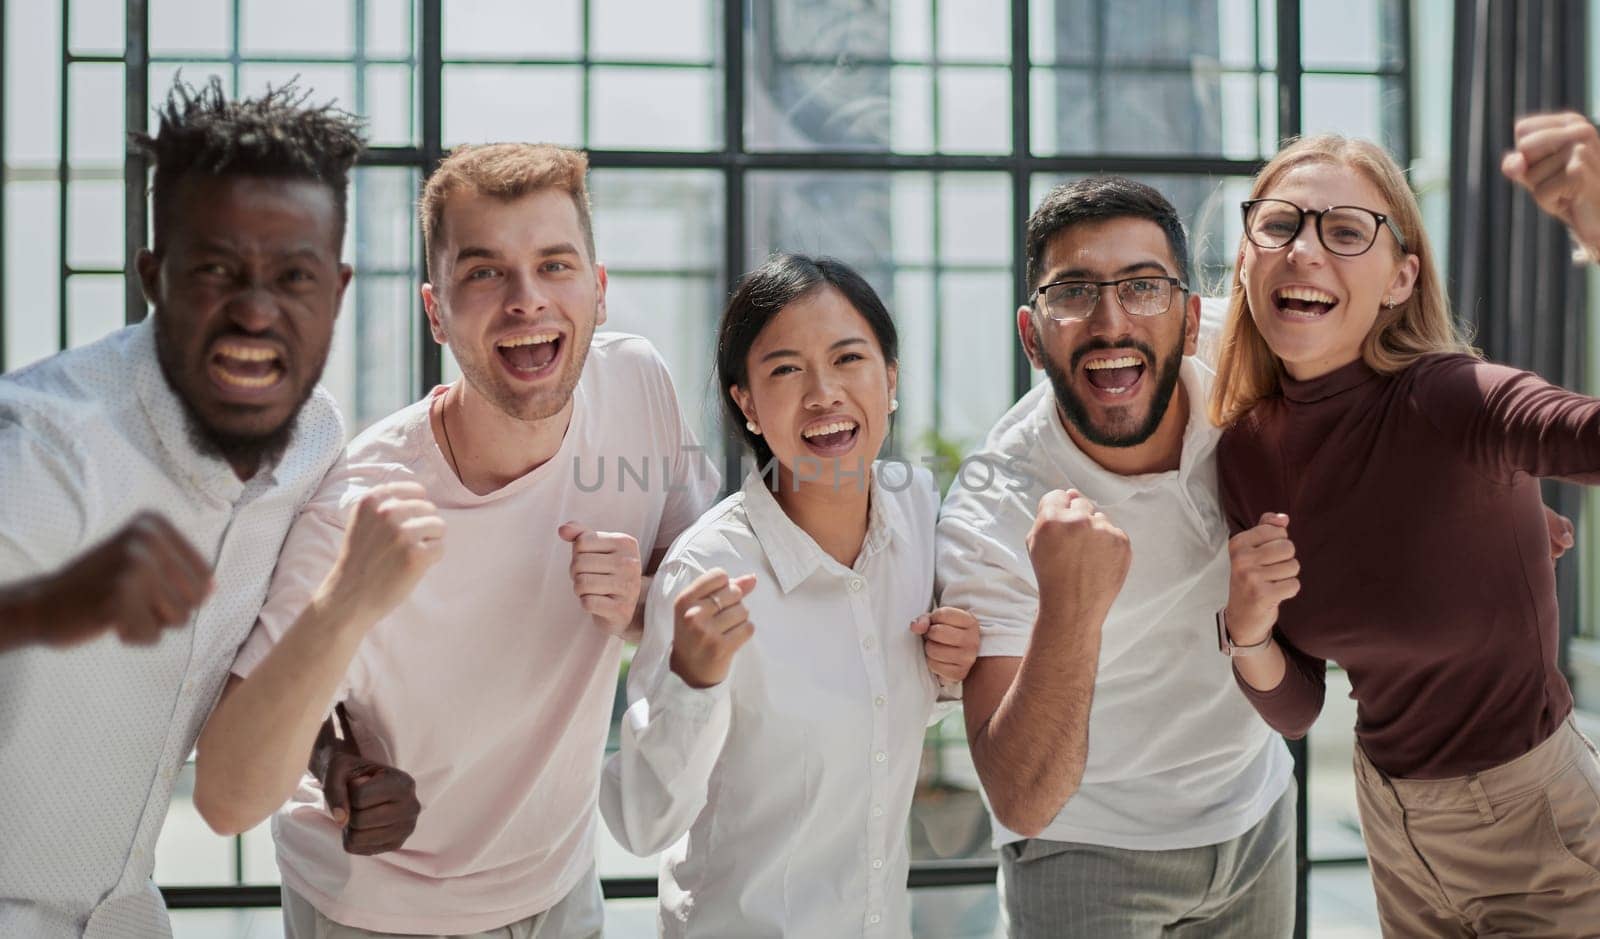 Group of mono-ethnic corporate employees clenching their fists celebrating success